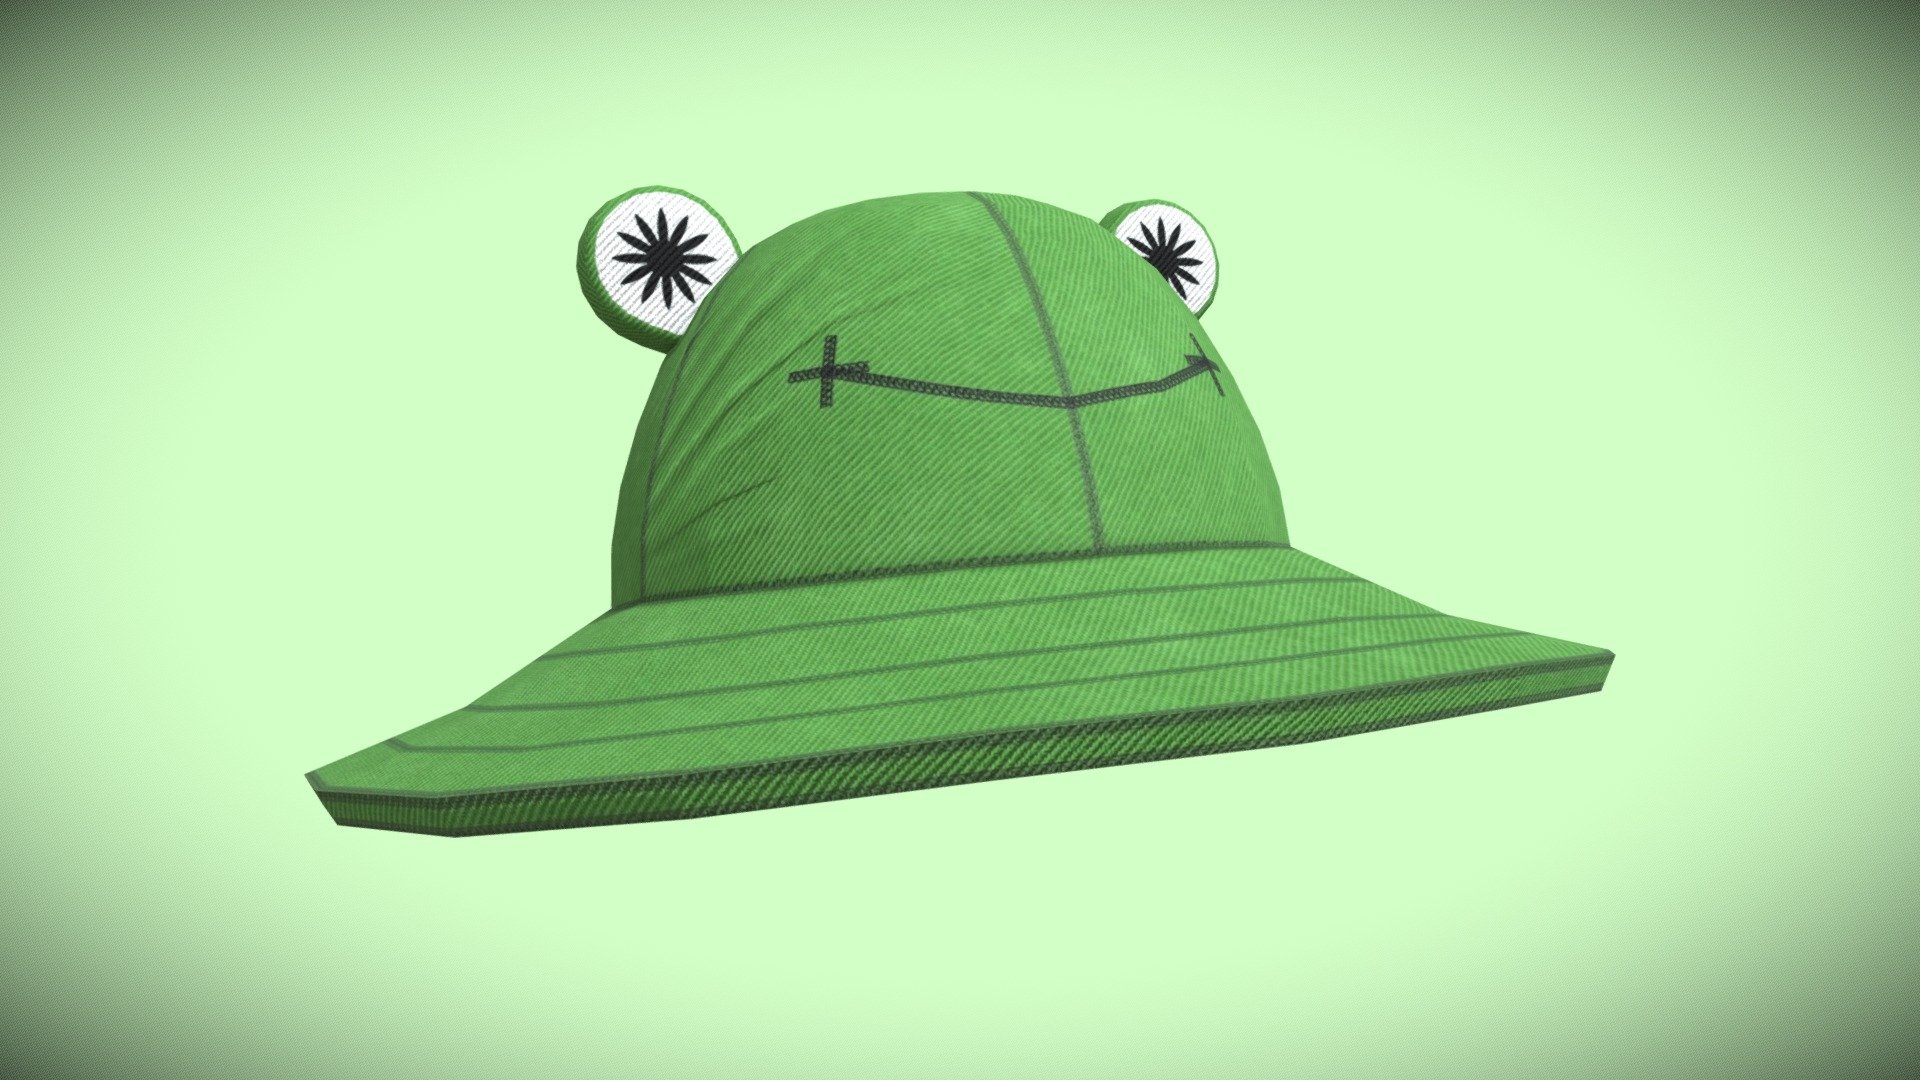 A bucket hat with smily frog. I made 3 versions of the hat, this is the Green version. The others can be found here:

Black:
https://sketchfab.com/3d-models/black-frog-hat-00f9dd4c828145549a193a448857191a

White:
https://sketchfab.com/3d-models/white-frog-hat-e5d82ab2d6b04f8382293035e03601de

Modelled in Maya, textured in Substance Painter, entirely by me 3d model